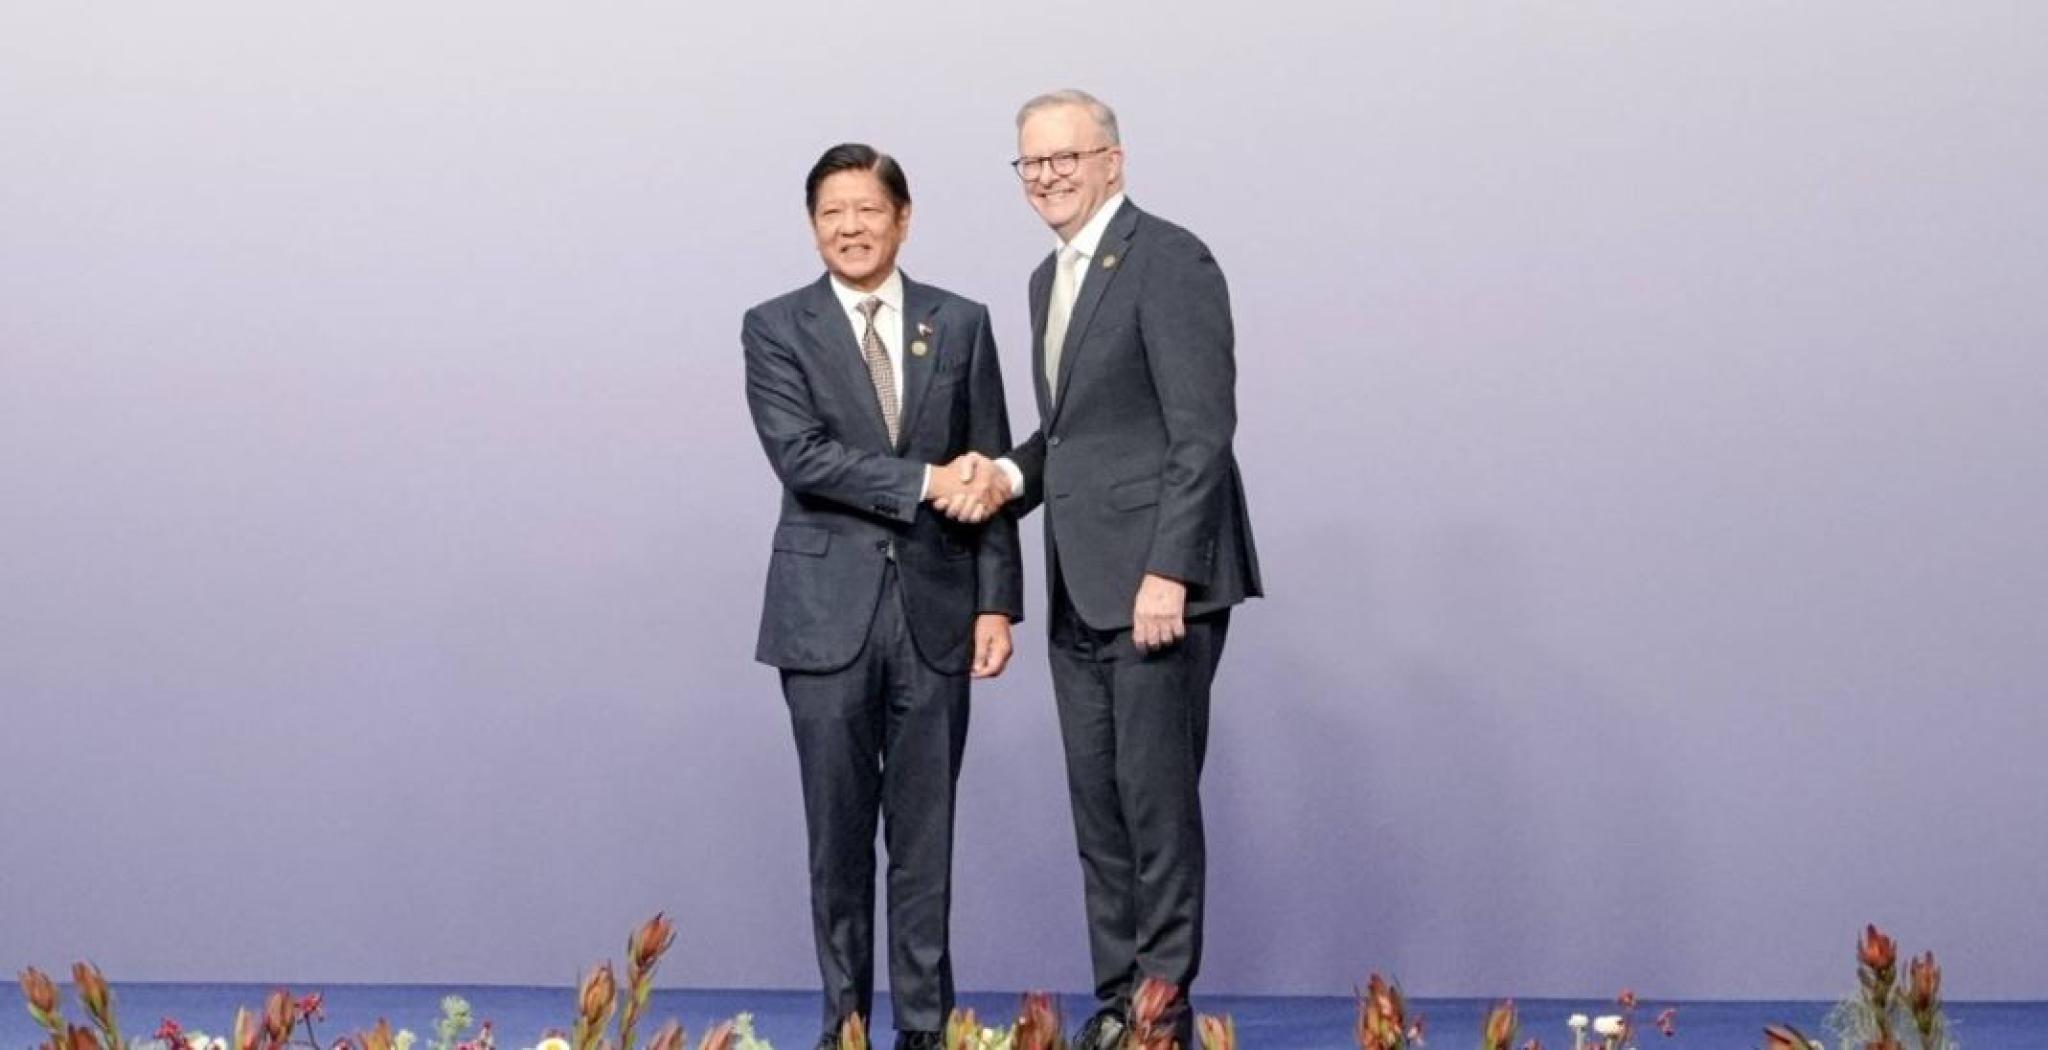 President Ferdinand R. Marcos Jr., receive a formal welcome from Australian Prime Minister Anthony Albanese at the ASEAN-Australia Summit in Melbourne